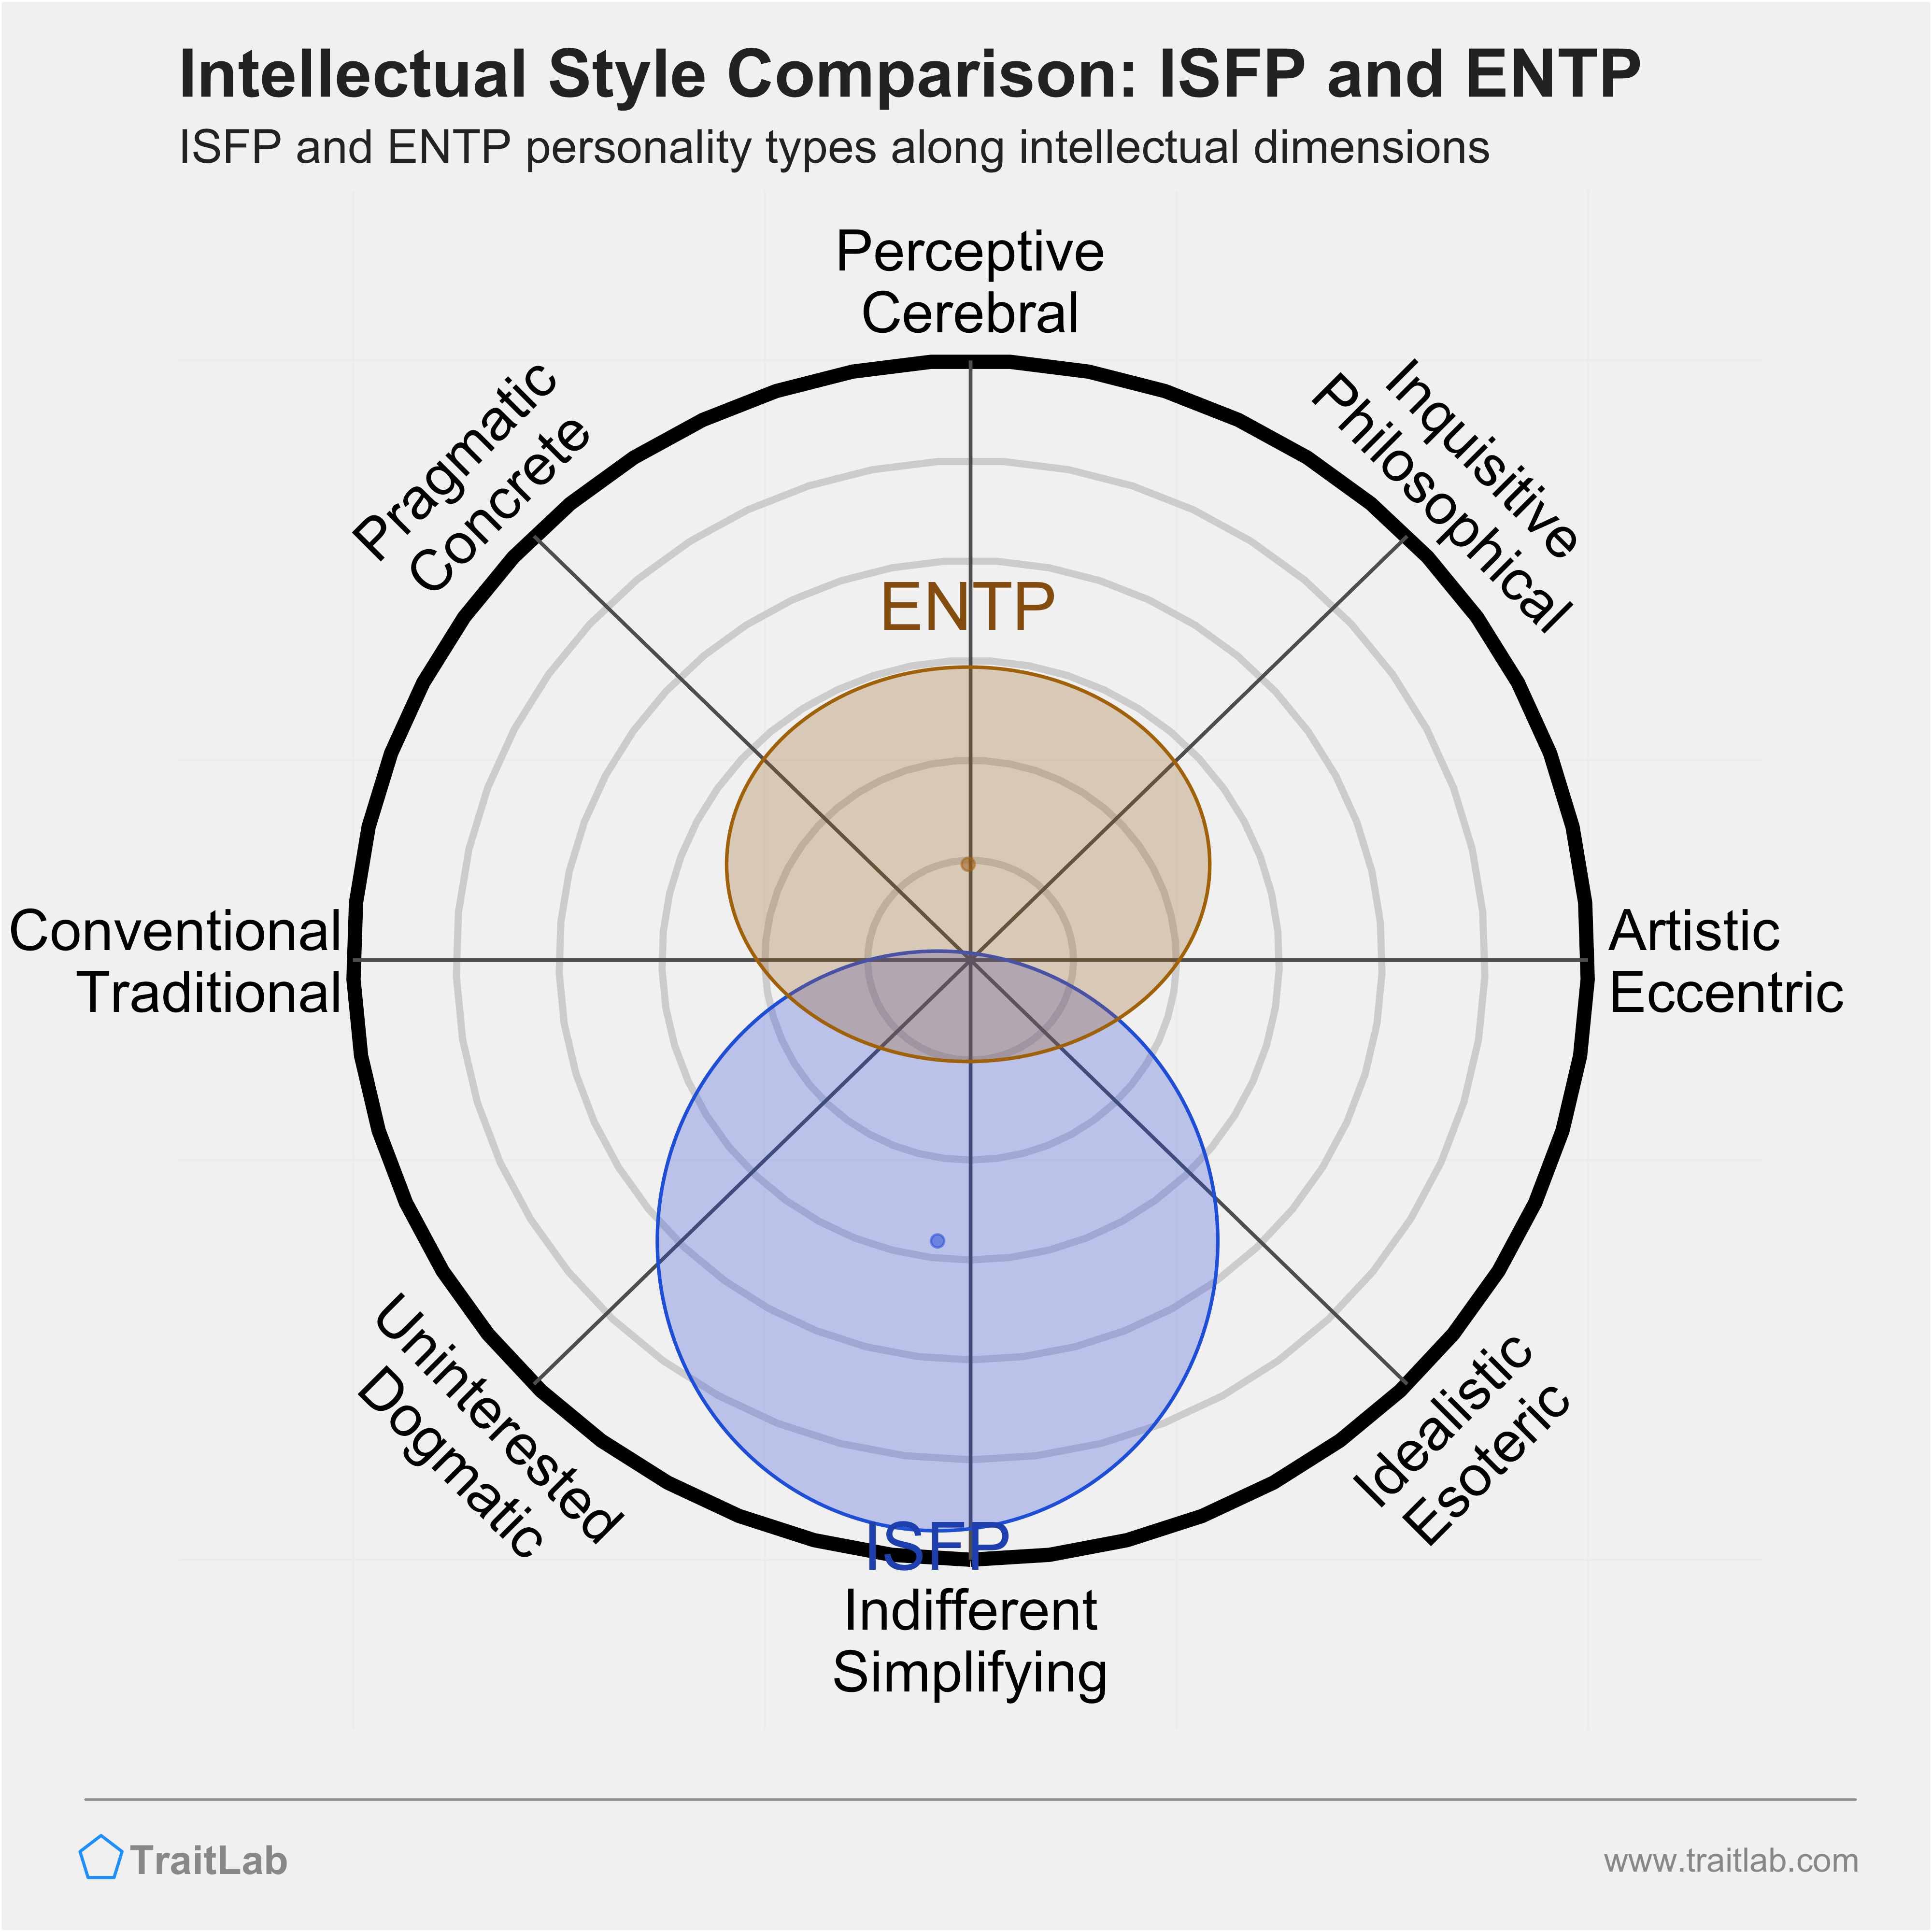 ISFP and ENTP comparison across intellectual dimensions